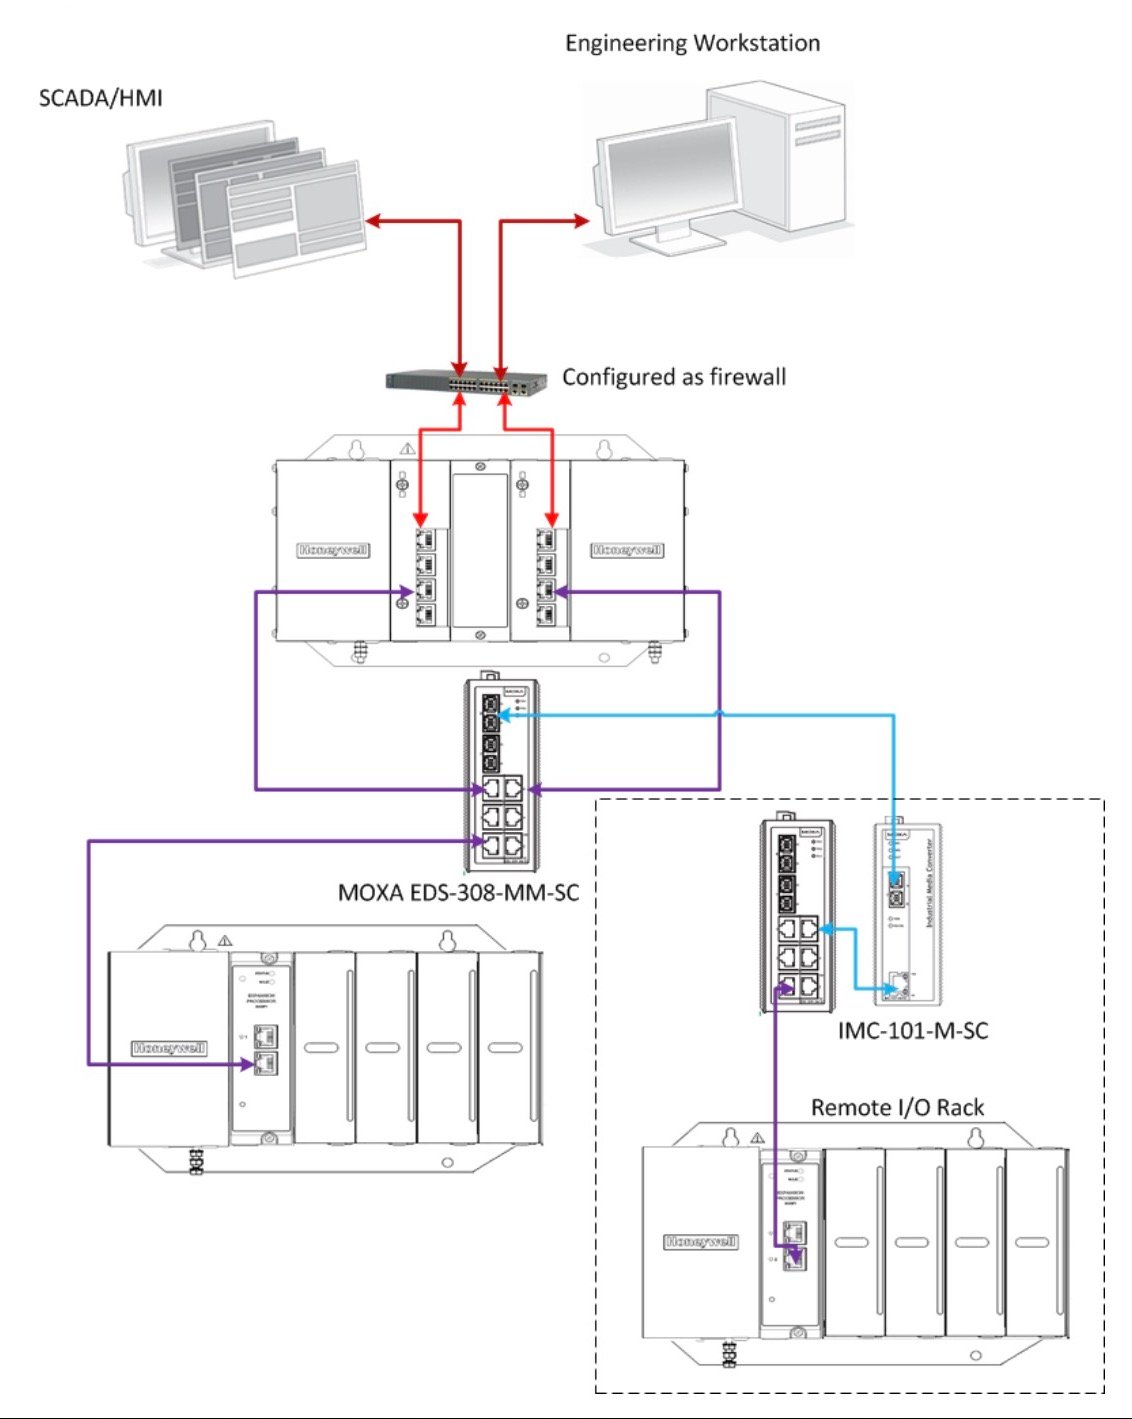 System architecture of a ControlEdge PLC